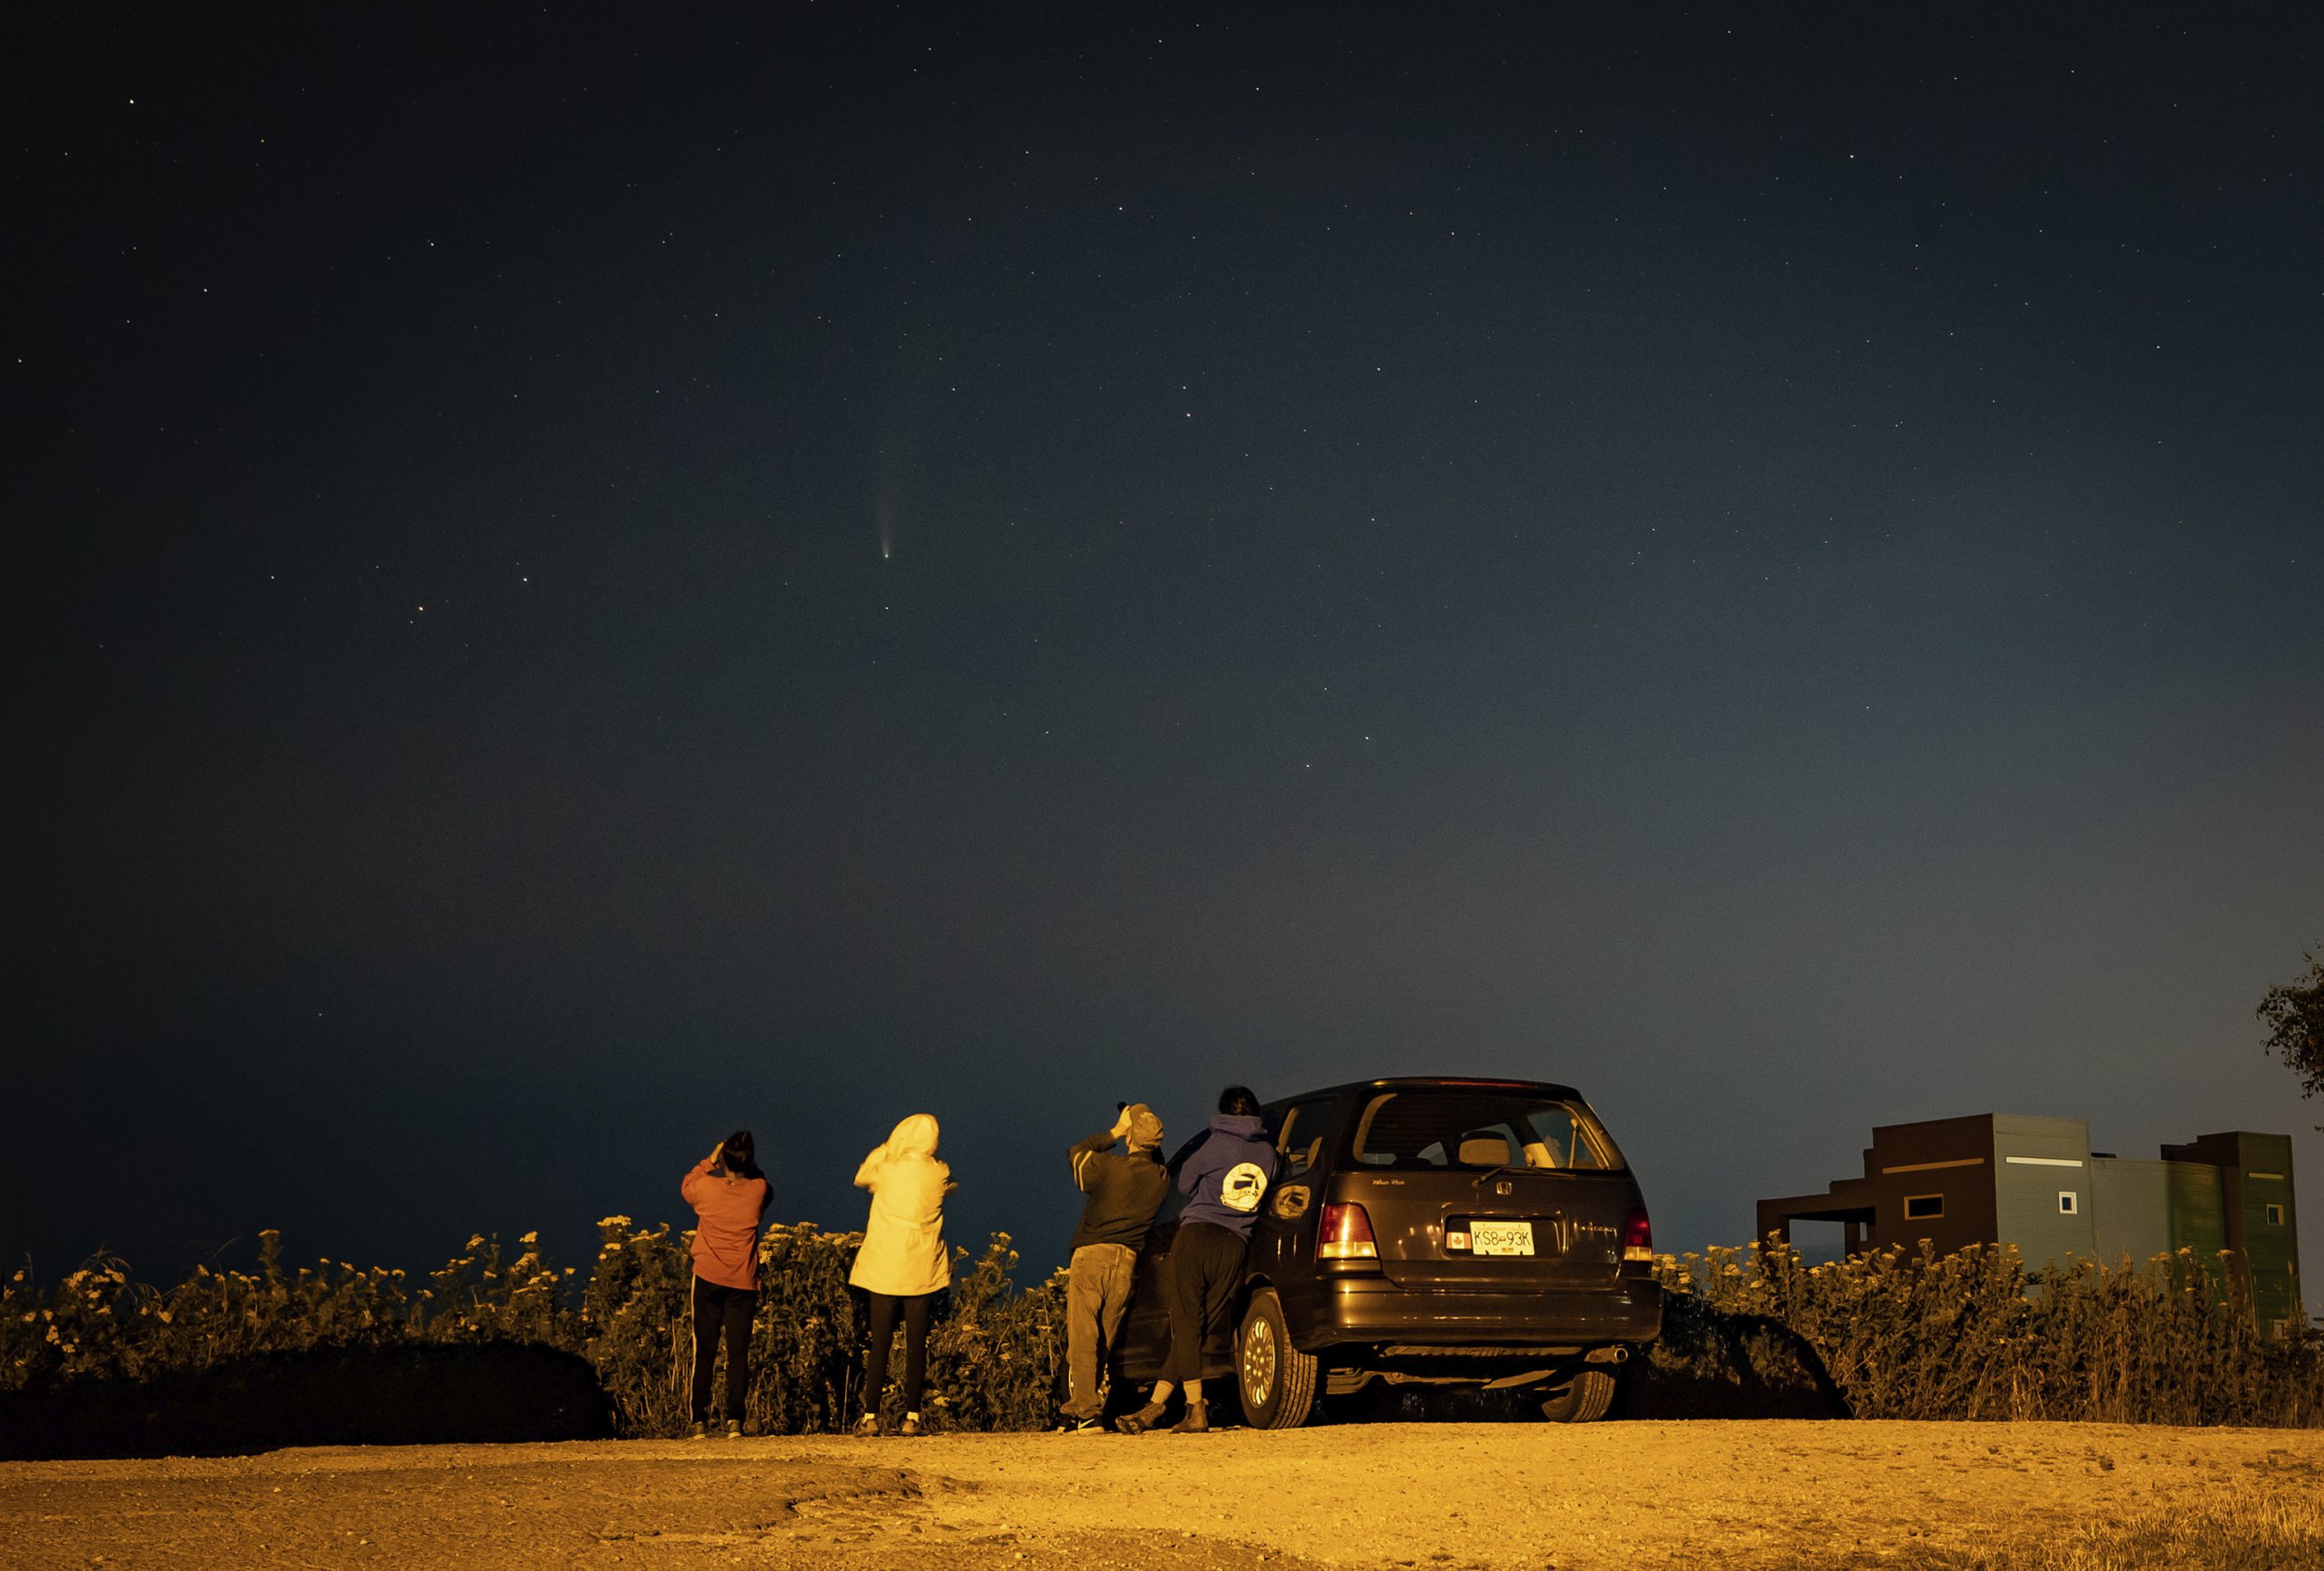 People use binoculars to view the comet Neowise as it appears in the night sky, in Delta, B.C., Monday, July 20, 2020. (Darryl Dyck/The Canadian Press via AP)